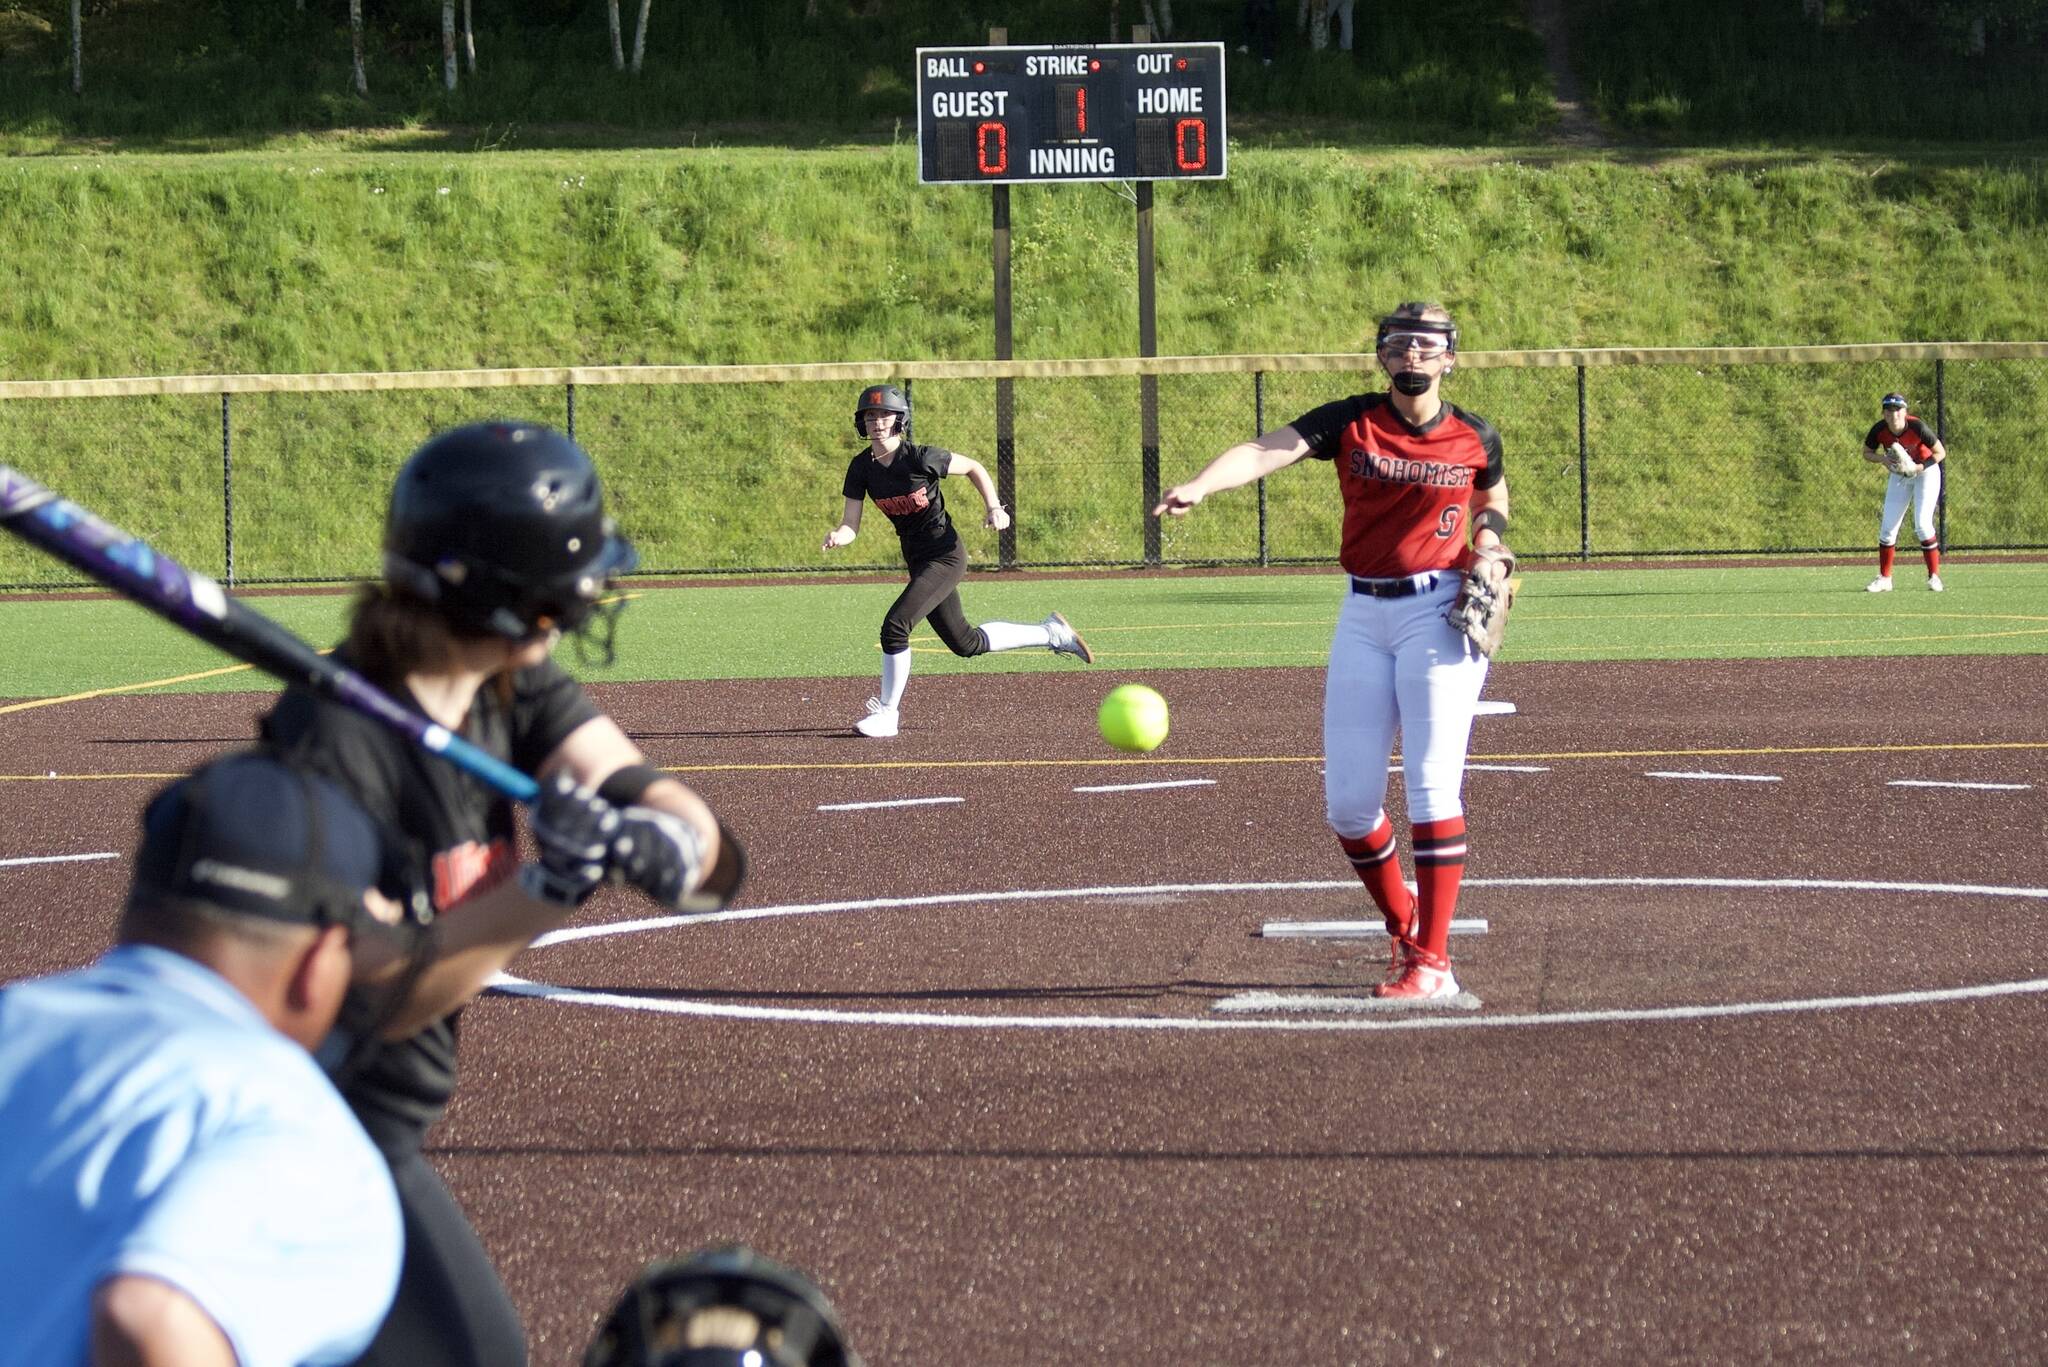 Snohomish sophomore Abby Edwards pitches during a Class 3A District 1 semifinal game against Monroe on Tuesday at Phil Johnson Ballfields in Everett. Edwards pitched seven innings with 10 strikeouts as the top-seeded Panthers won 5-4. (Taras McCurdie / The Herald)